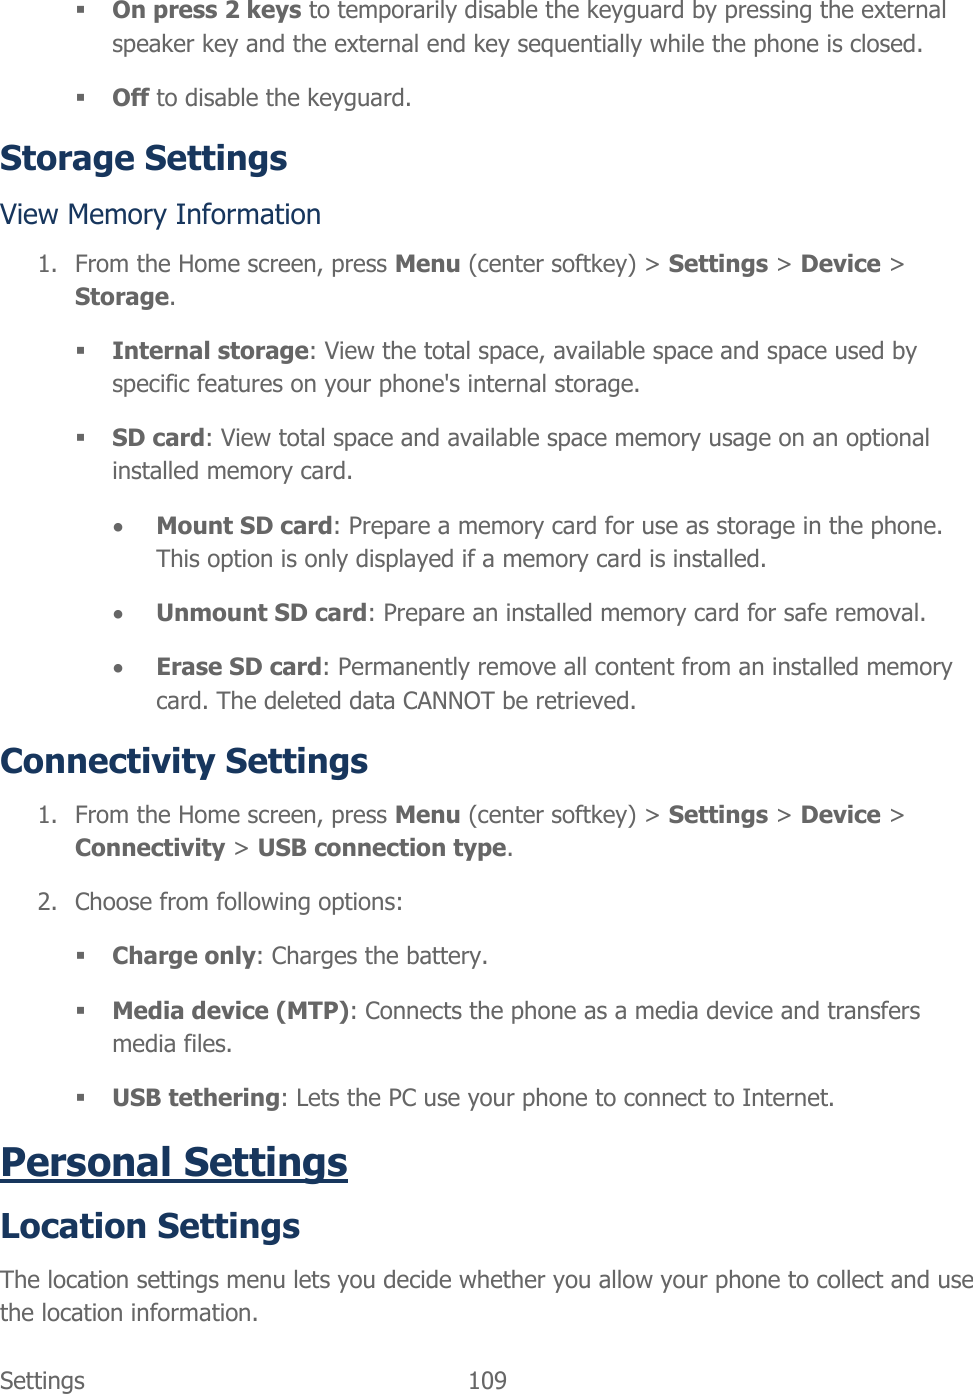  Settings  109    On press 2 keys to temporarily disable the keyguard by pressing the external speaker key and the external end key sequentially while the phone is closed.  Off to disable the keyguard. Storage Settings View Memory Information 1. From the Home screen, press Menu (center softkey) &gt; Settings &gt; Device &gt; Storage.  Internal storage: View the total space, available space and space used by specific features on your phone&apos;s internal storage.  SD card: View total space and available space memory usage on an optional installed memory card.  Mount SD card: Prepare a memory card for use as storage in the phone. This option is only displayed if a memory card is installed.  Unmount SD card: Prepare an installed memory card for safe removal.  Erase SD card: Permanently remove all content from an installed memory card. The deleted data CANNOT be retrieved. Connectivity Settings 1. From the Home screen, press Menu (center softkey) &gt; Settings &gt; Device &gt; Connectivity &gt; USB connection type. 2. Choose from following options:  Charge only: Charges the battery.  Media device (MTP): Connects the phone as a media device and transfers media files.  USB tethering: Lets the PC use your phone to connect to Internet. Personal Settings Location Settings The location settings menu lets you decide whether you allow your phone to collect and use the location information. 